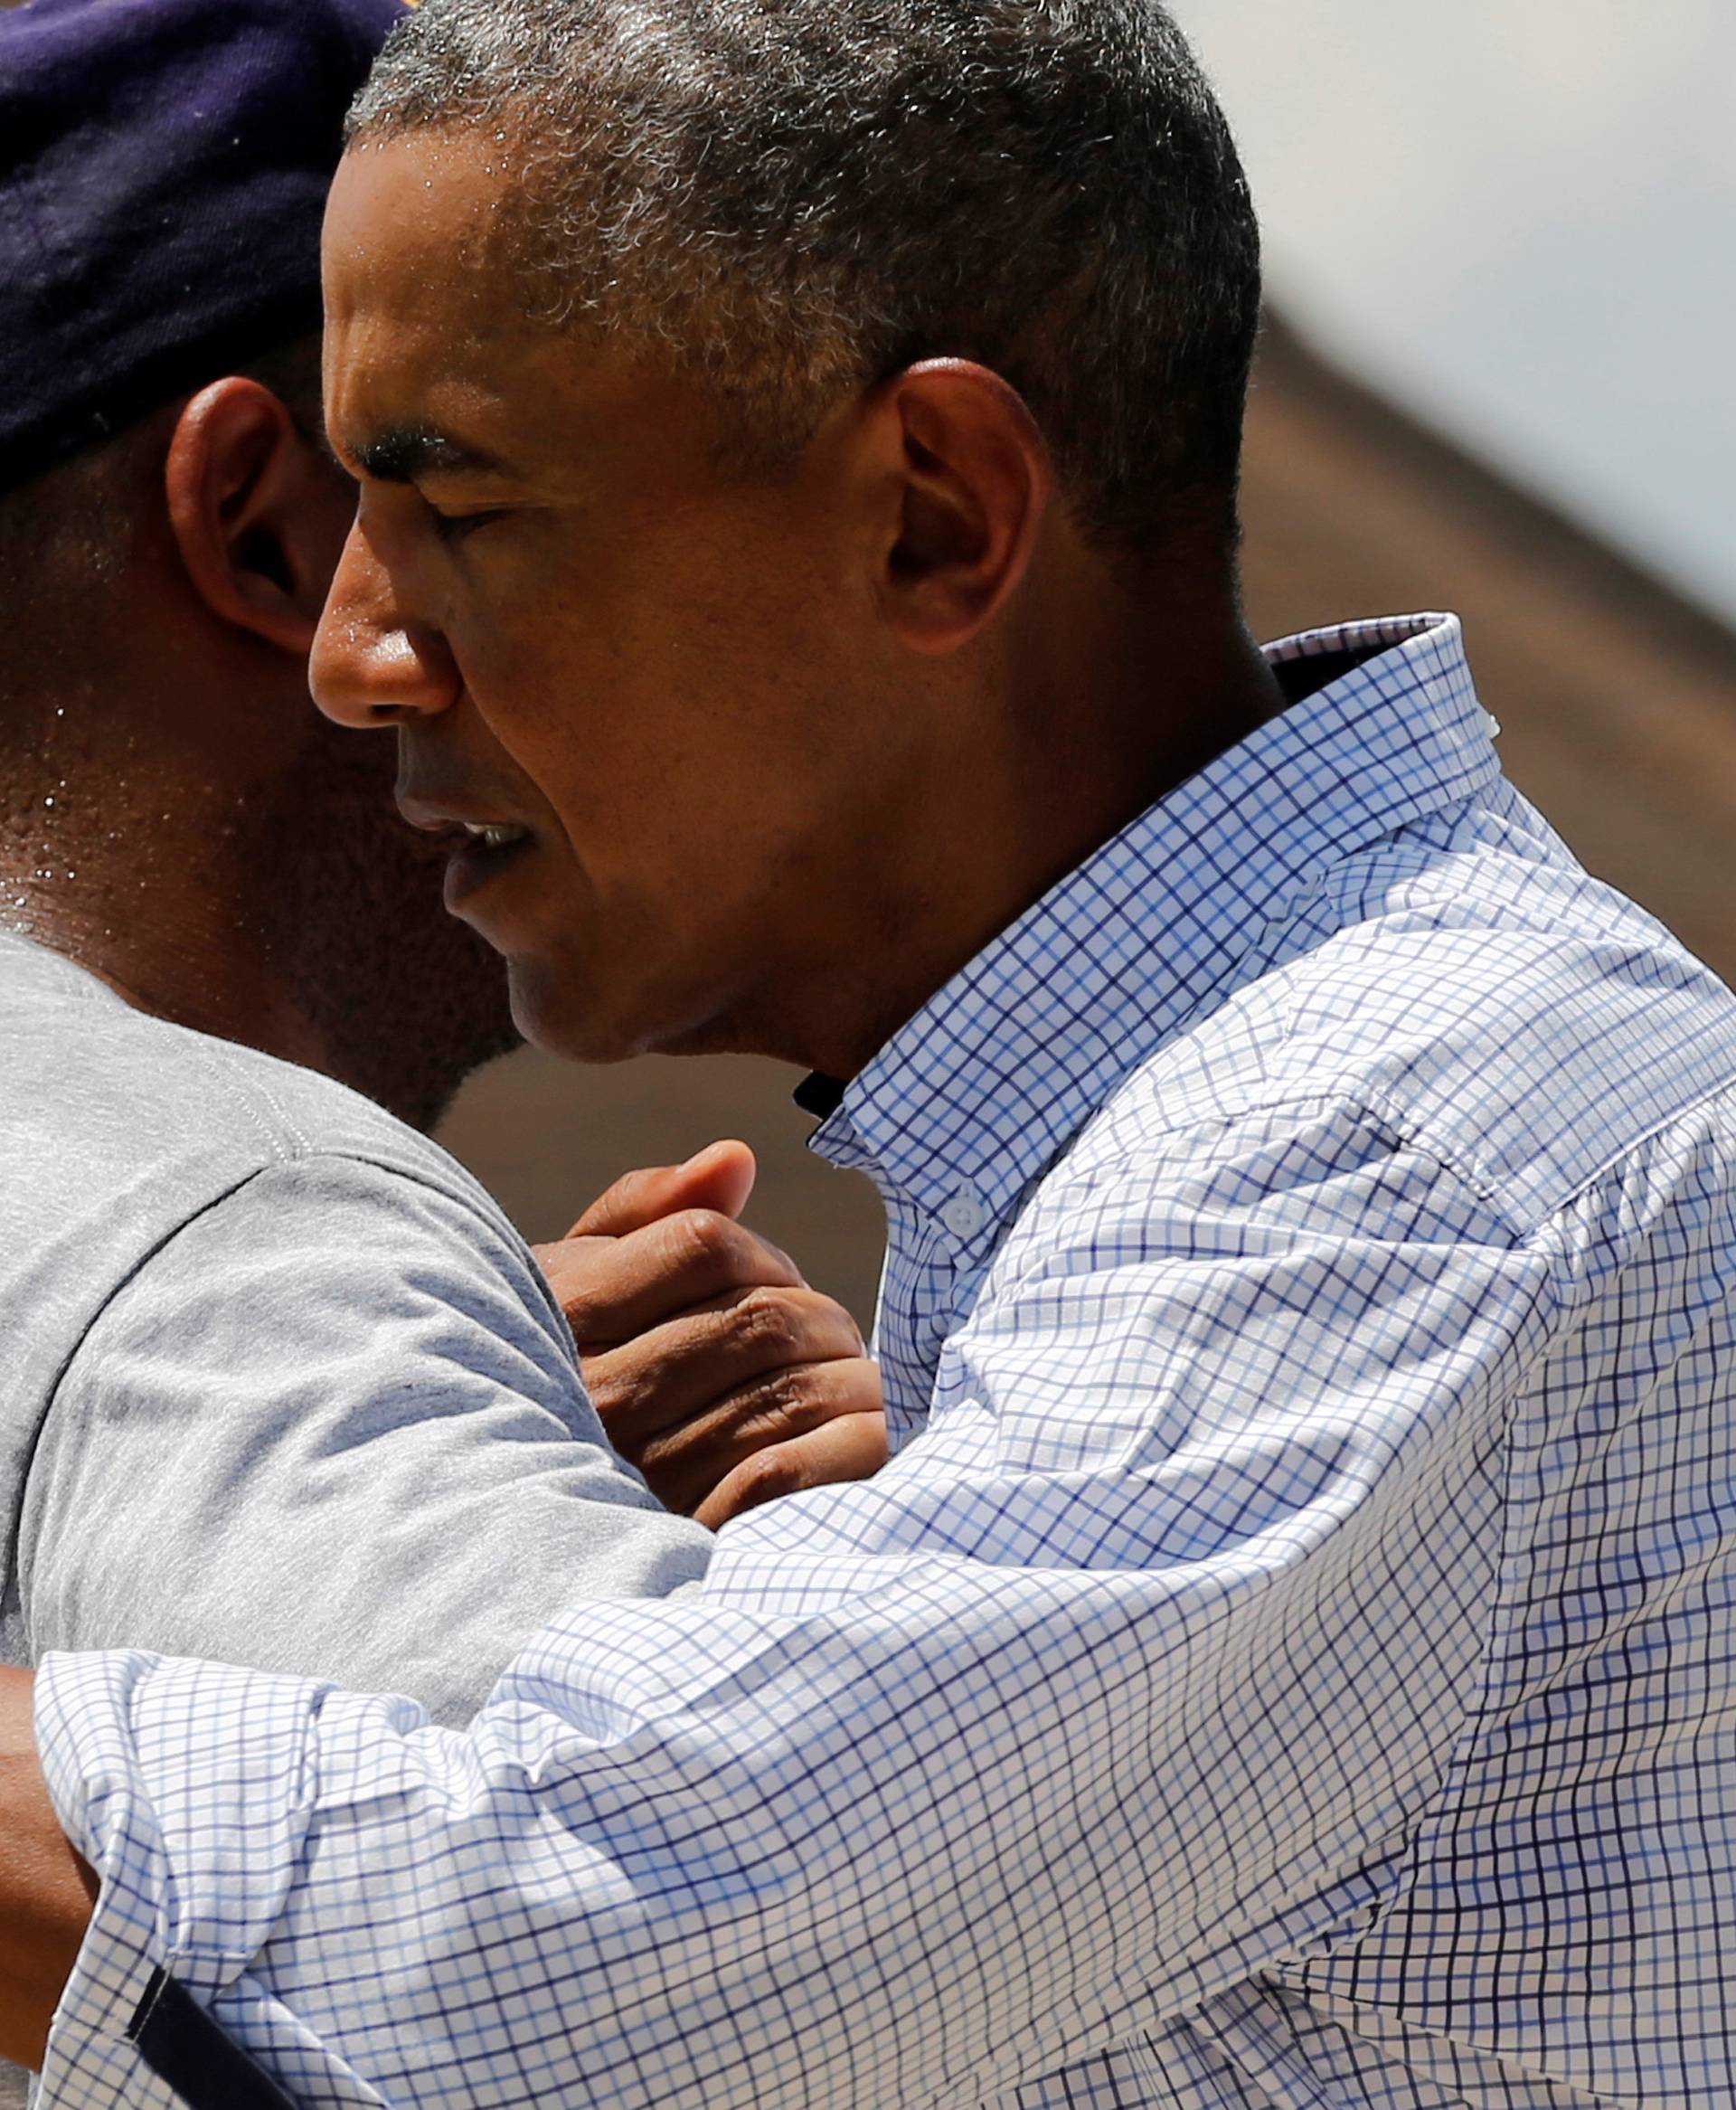 U.S. President Barack Obama greets a resident as he tours a flood-affected neighborhood in Zachary